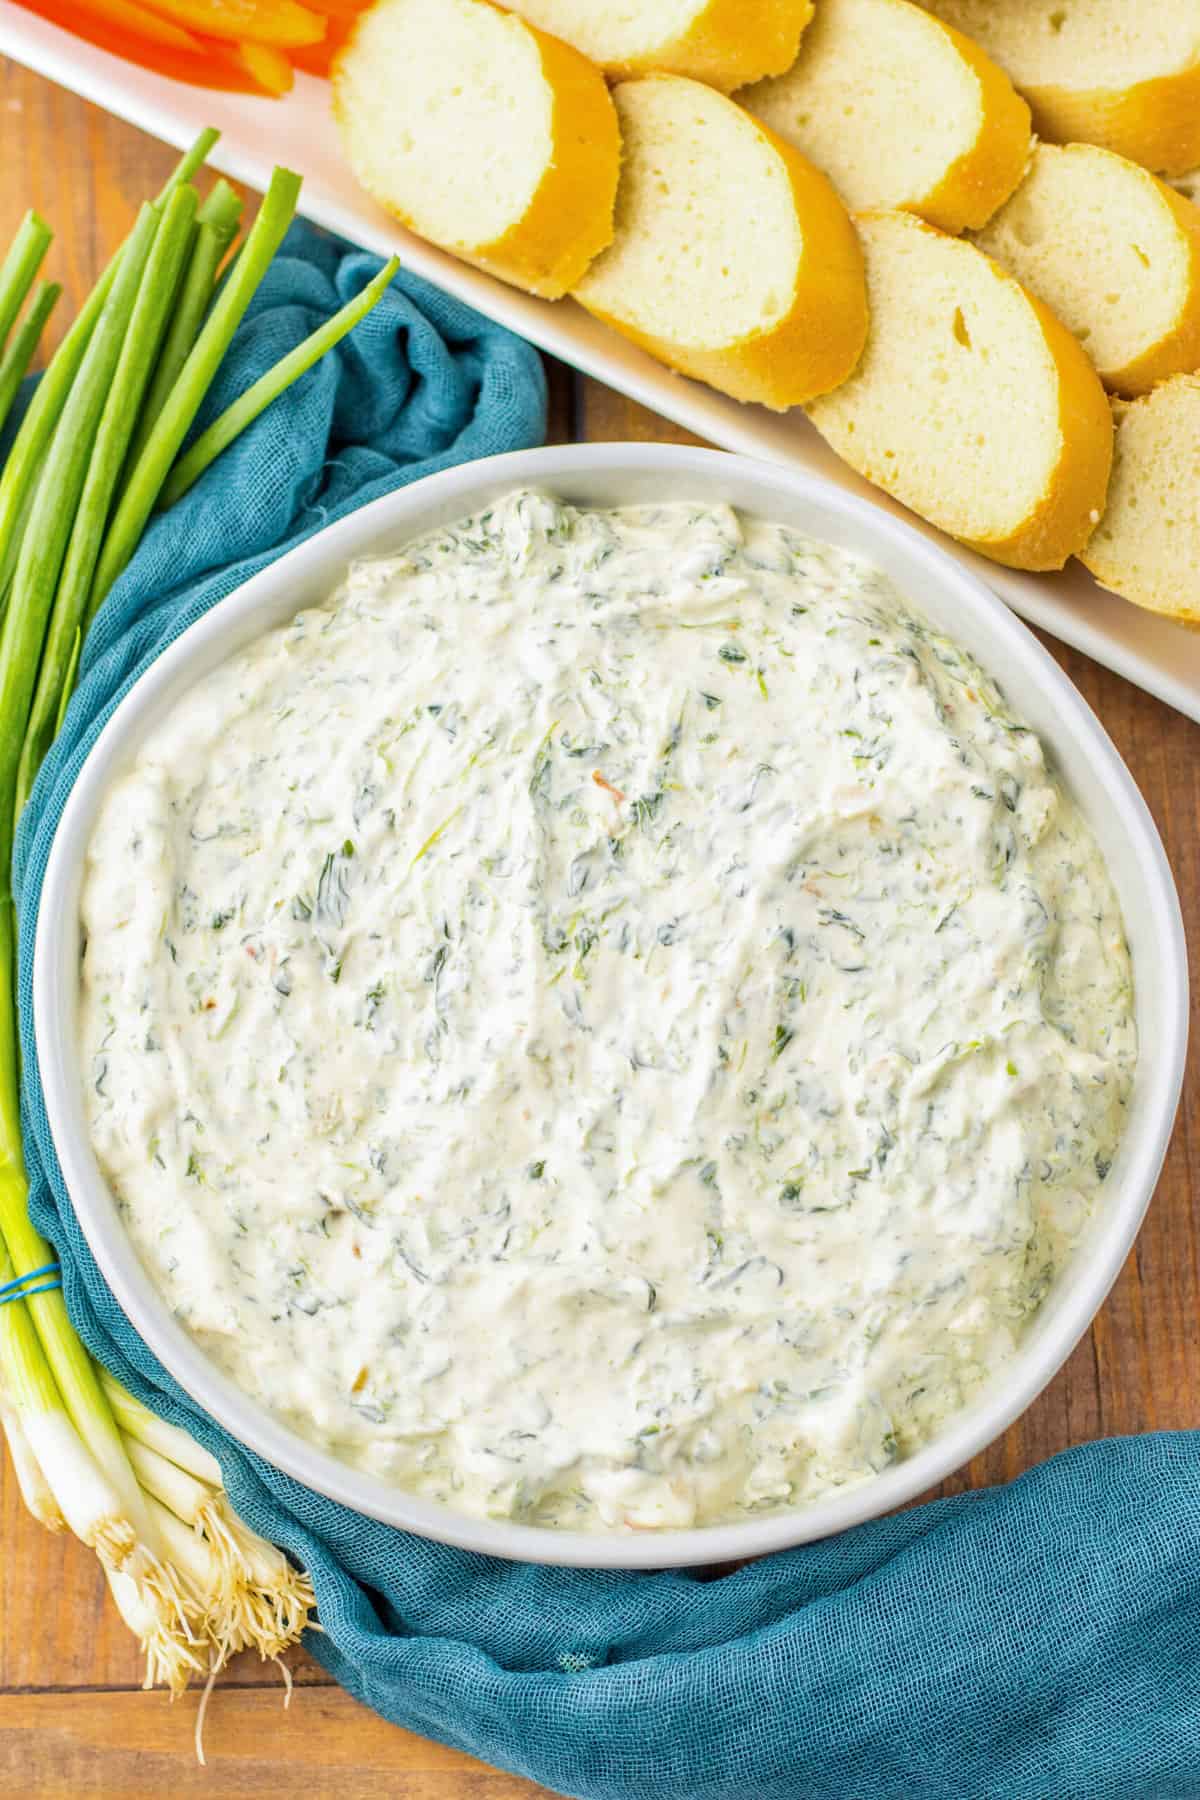 Classic Knorr spinach dip in a white serving bowl next to a tray of bread and veggies for dipping.